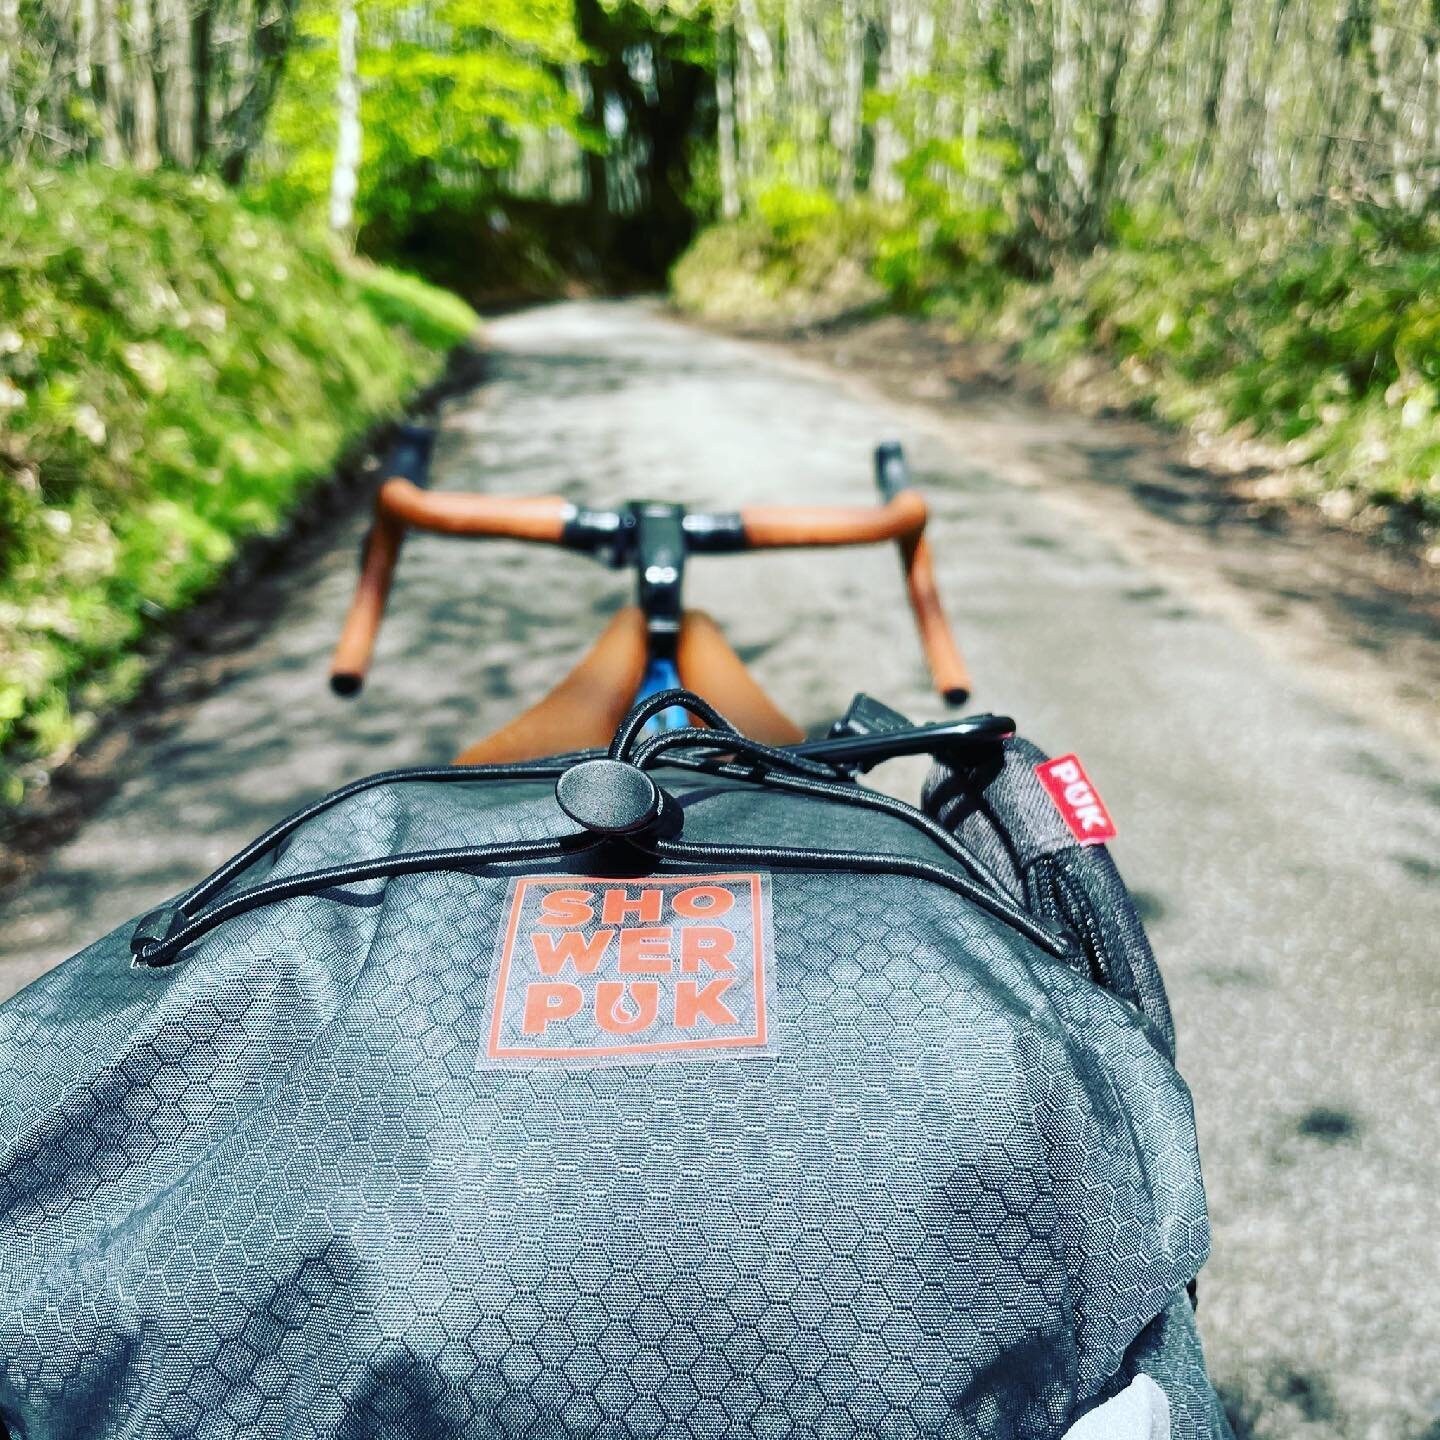 Monday 17th May. We wasted no time in packing up the bikes for a spot of touring when restrictions were lifted in the U.K. Where are you heading on your first adventure?

#biketouring #adventureriding #cycling #showerpuk #soap #staycation #soapiscool